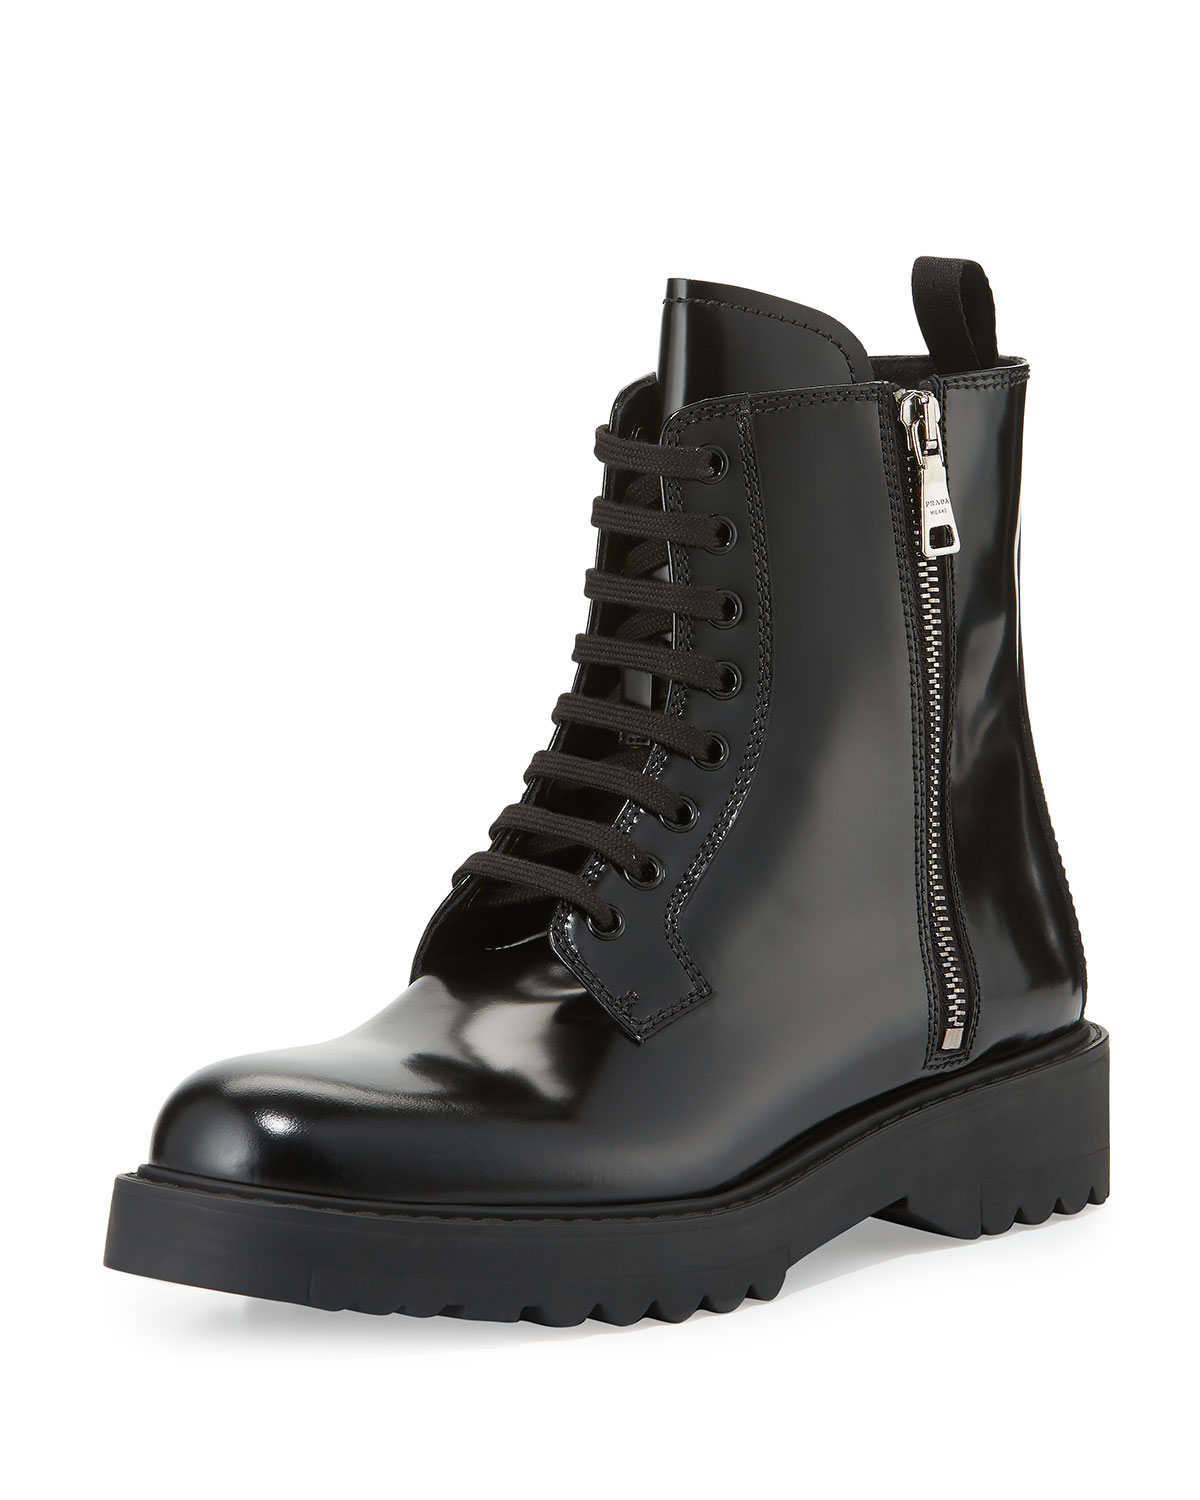 Lyst - Prada Polished Leather Combat Boot in Black